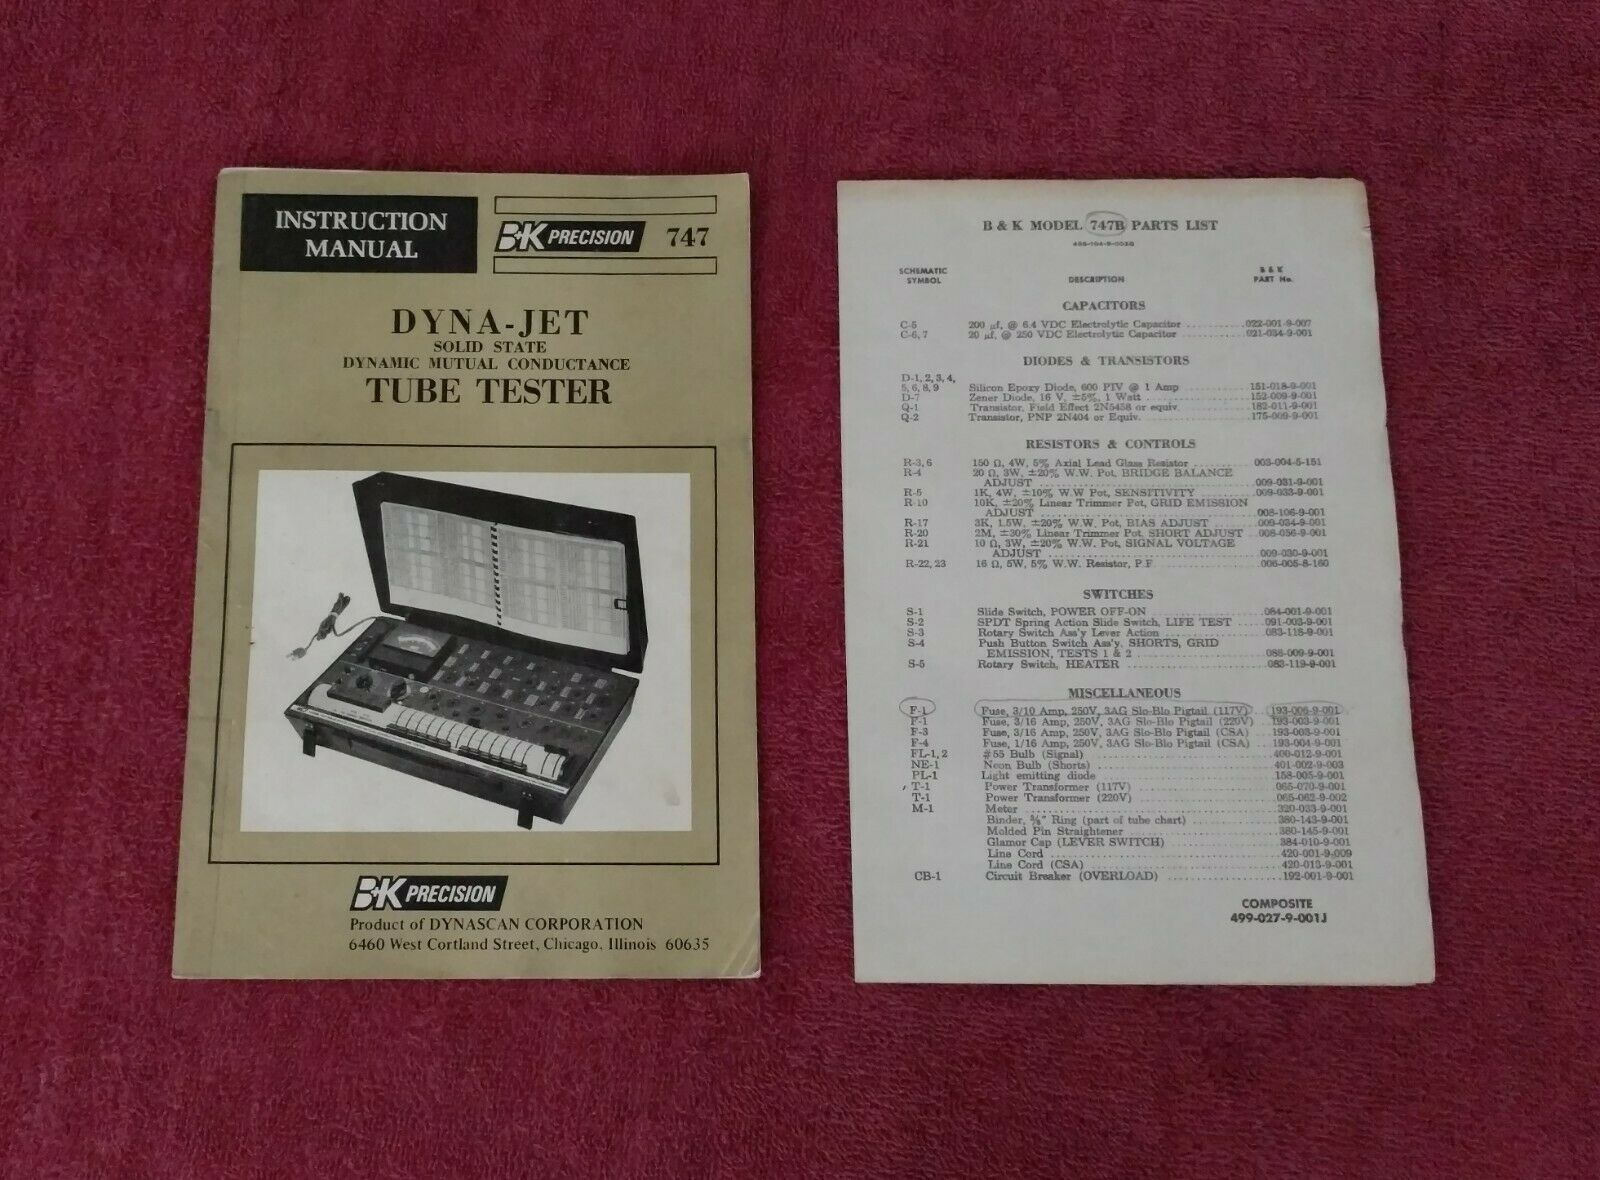 Vintage B&k 747 Tube Tester Manual With Parts List & Schematic Original